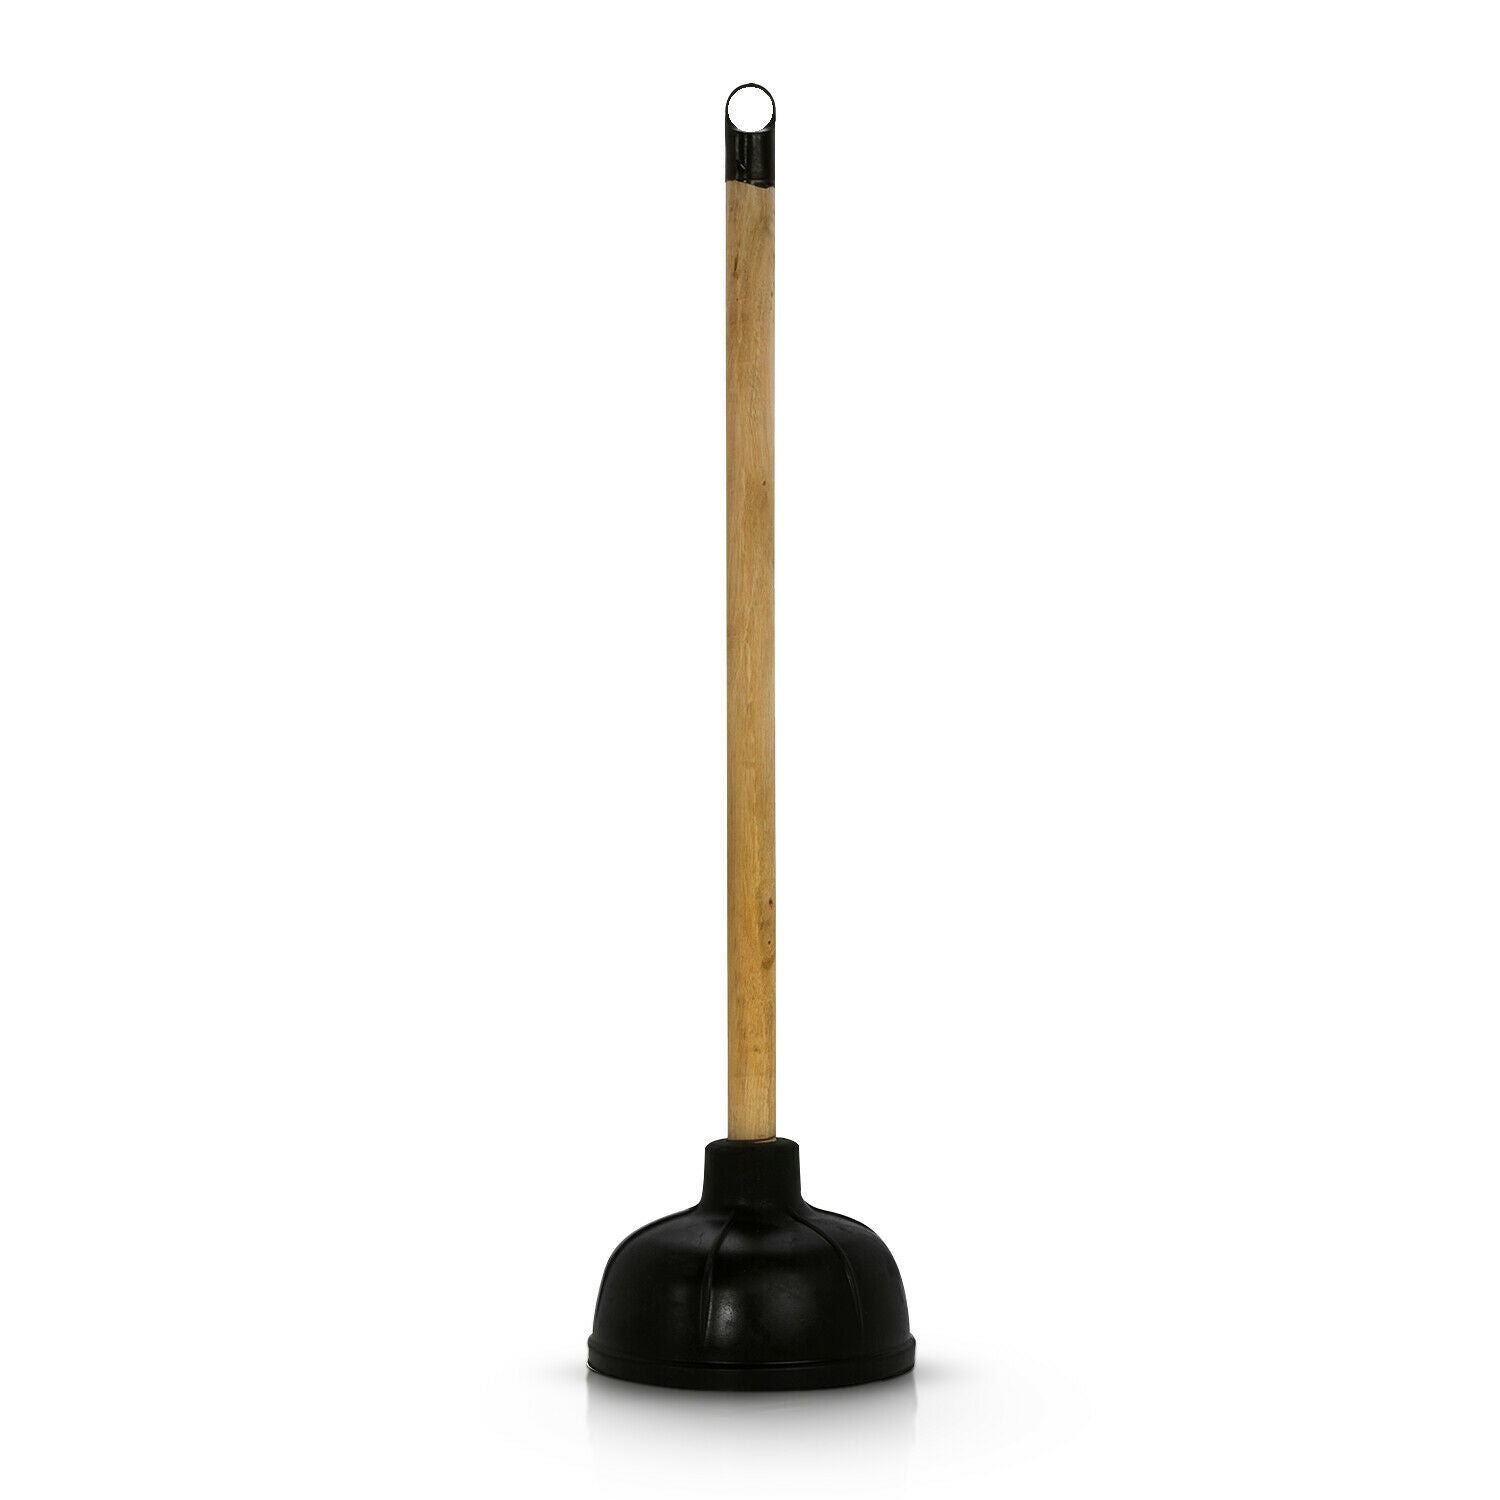 Royalford - Instant Toilet Air Plunger Royalford 